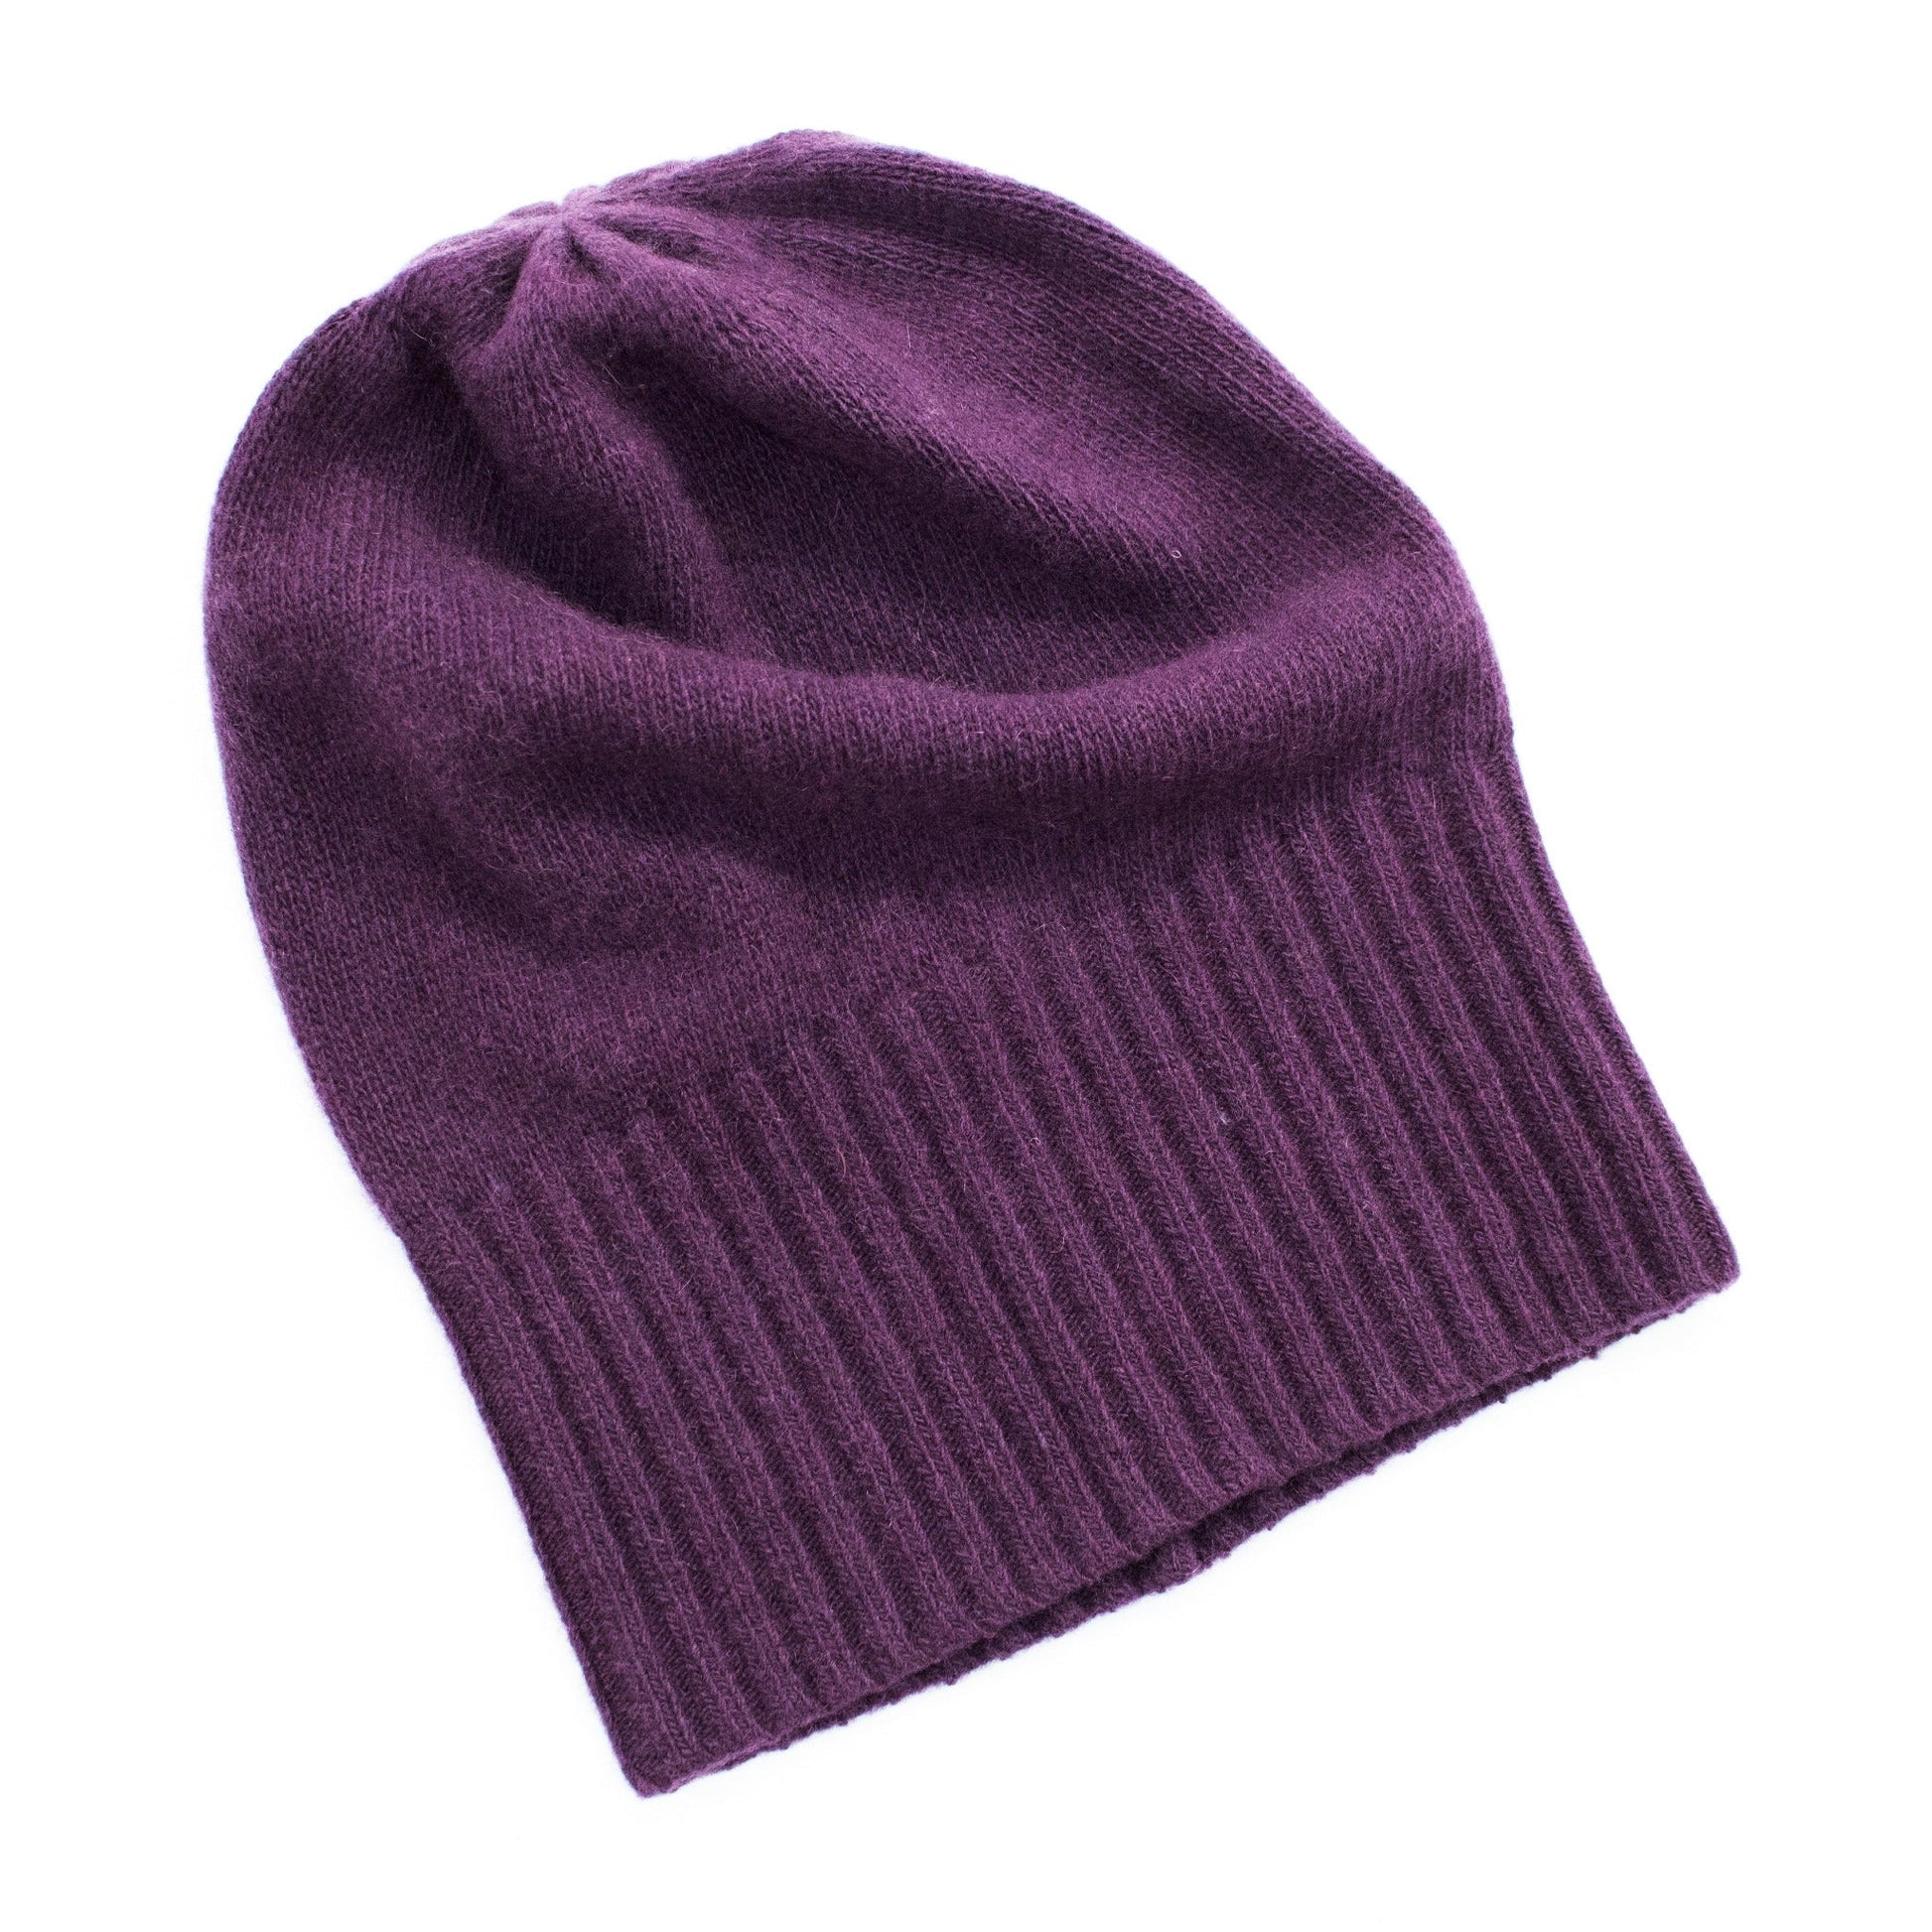 MEN'S CASHMERE SLOUCHY HAT - Scarvesnthangs